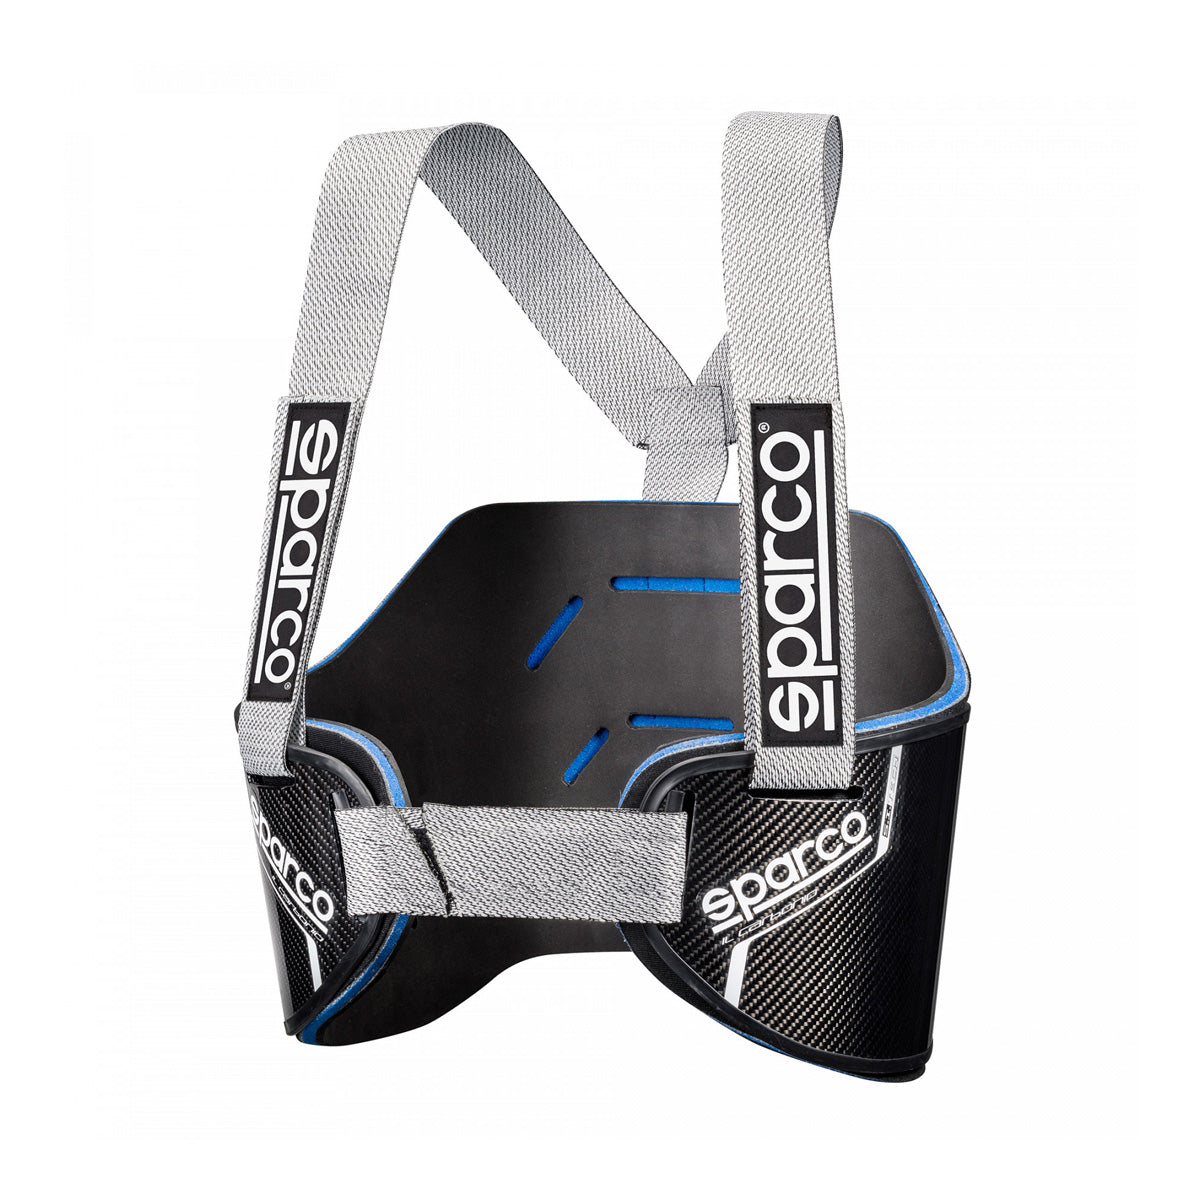 Sparco Carbon Rib Protector